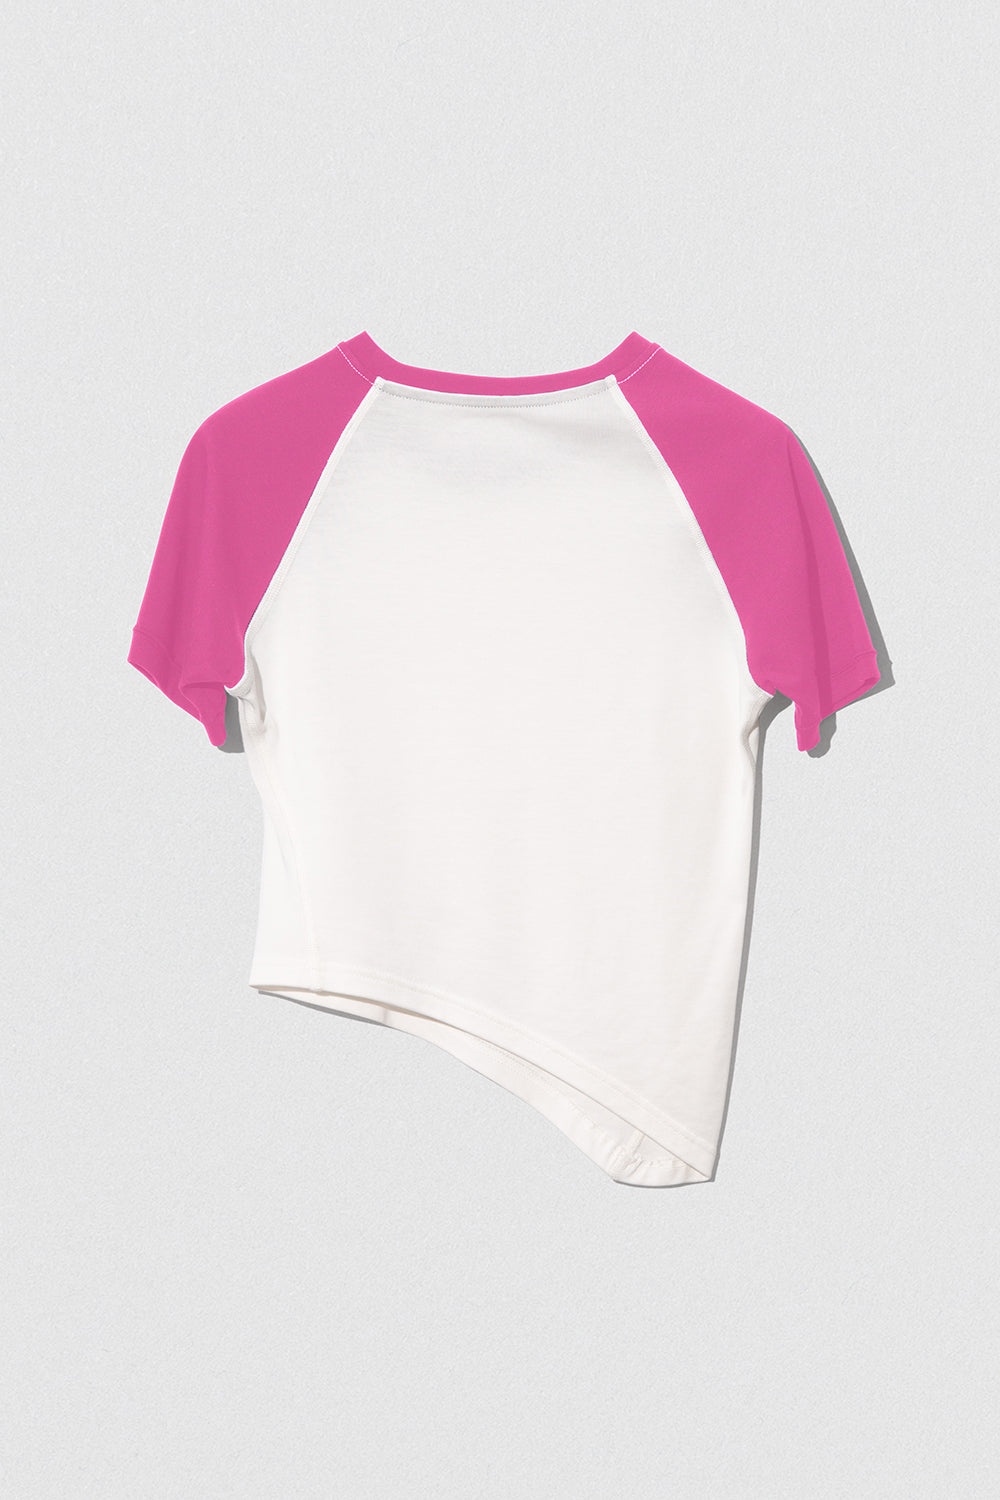 RASCAL BABY T T-SHIRT PINK-OFF WHITE LYOCELL BLEND - 1